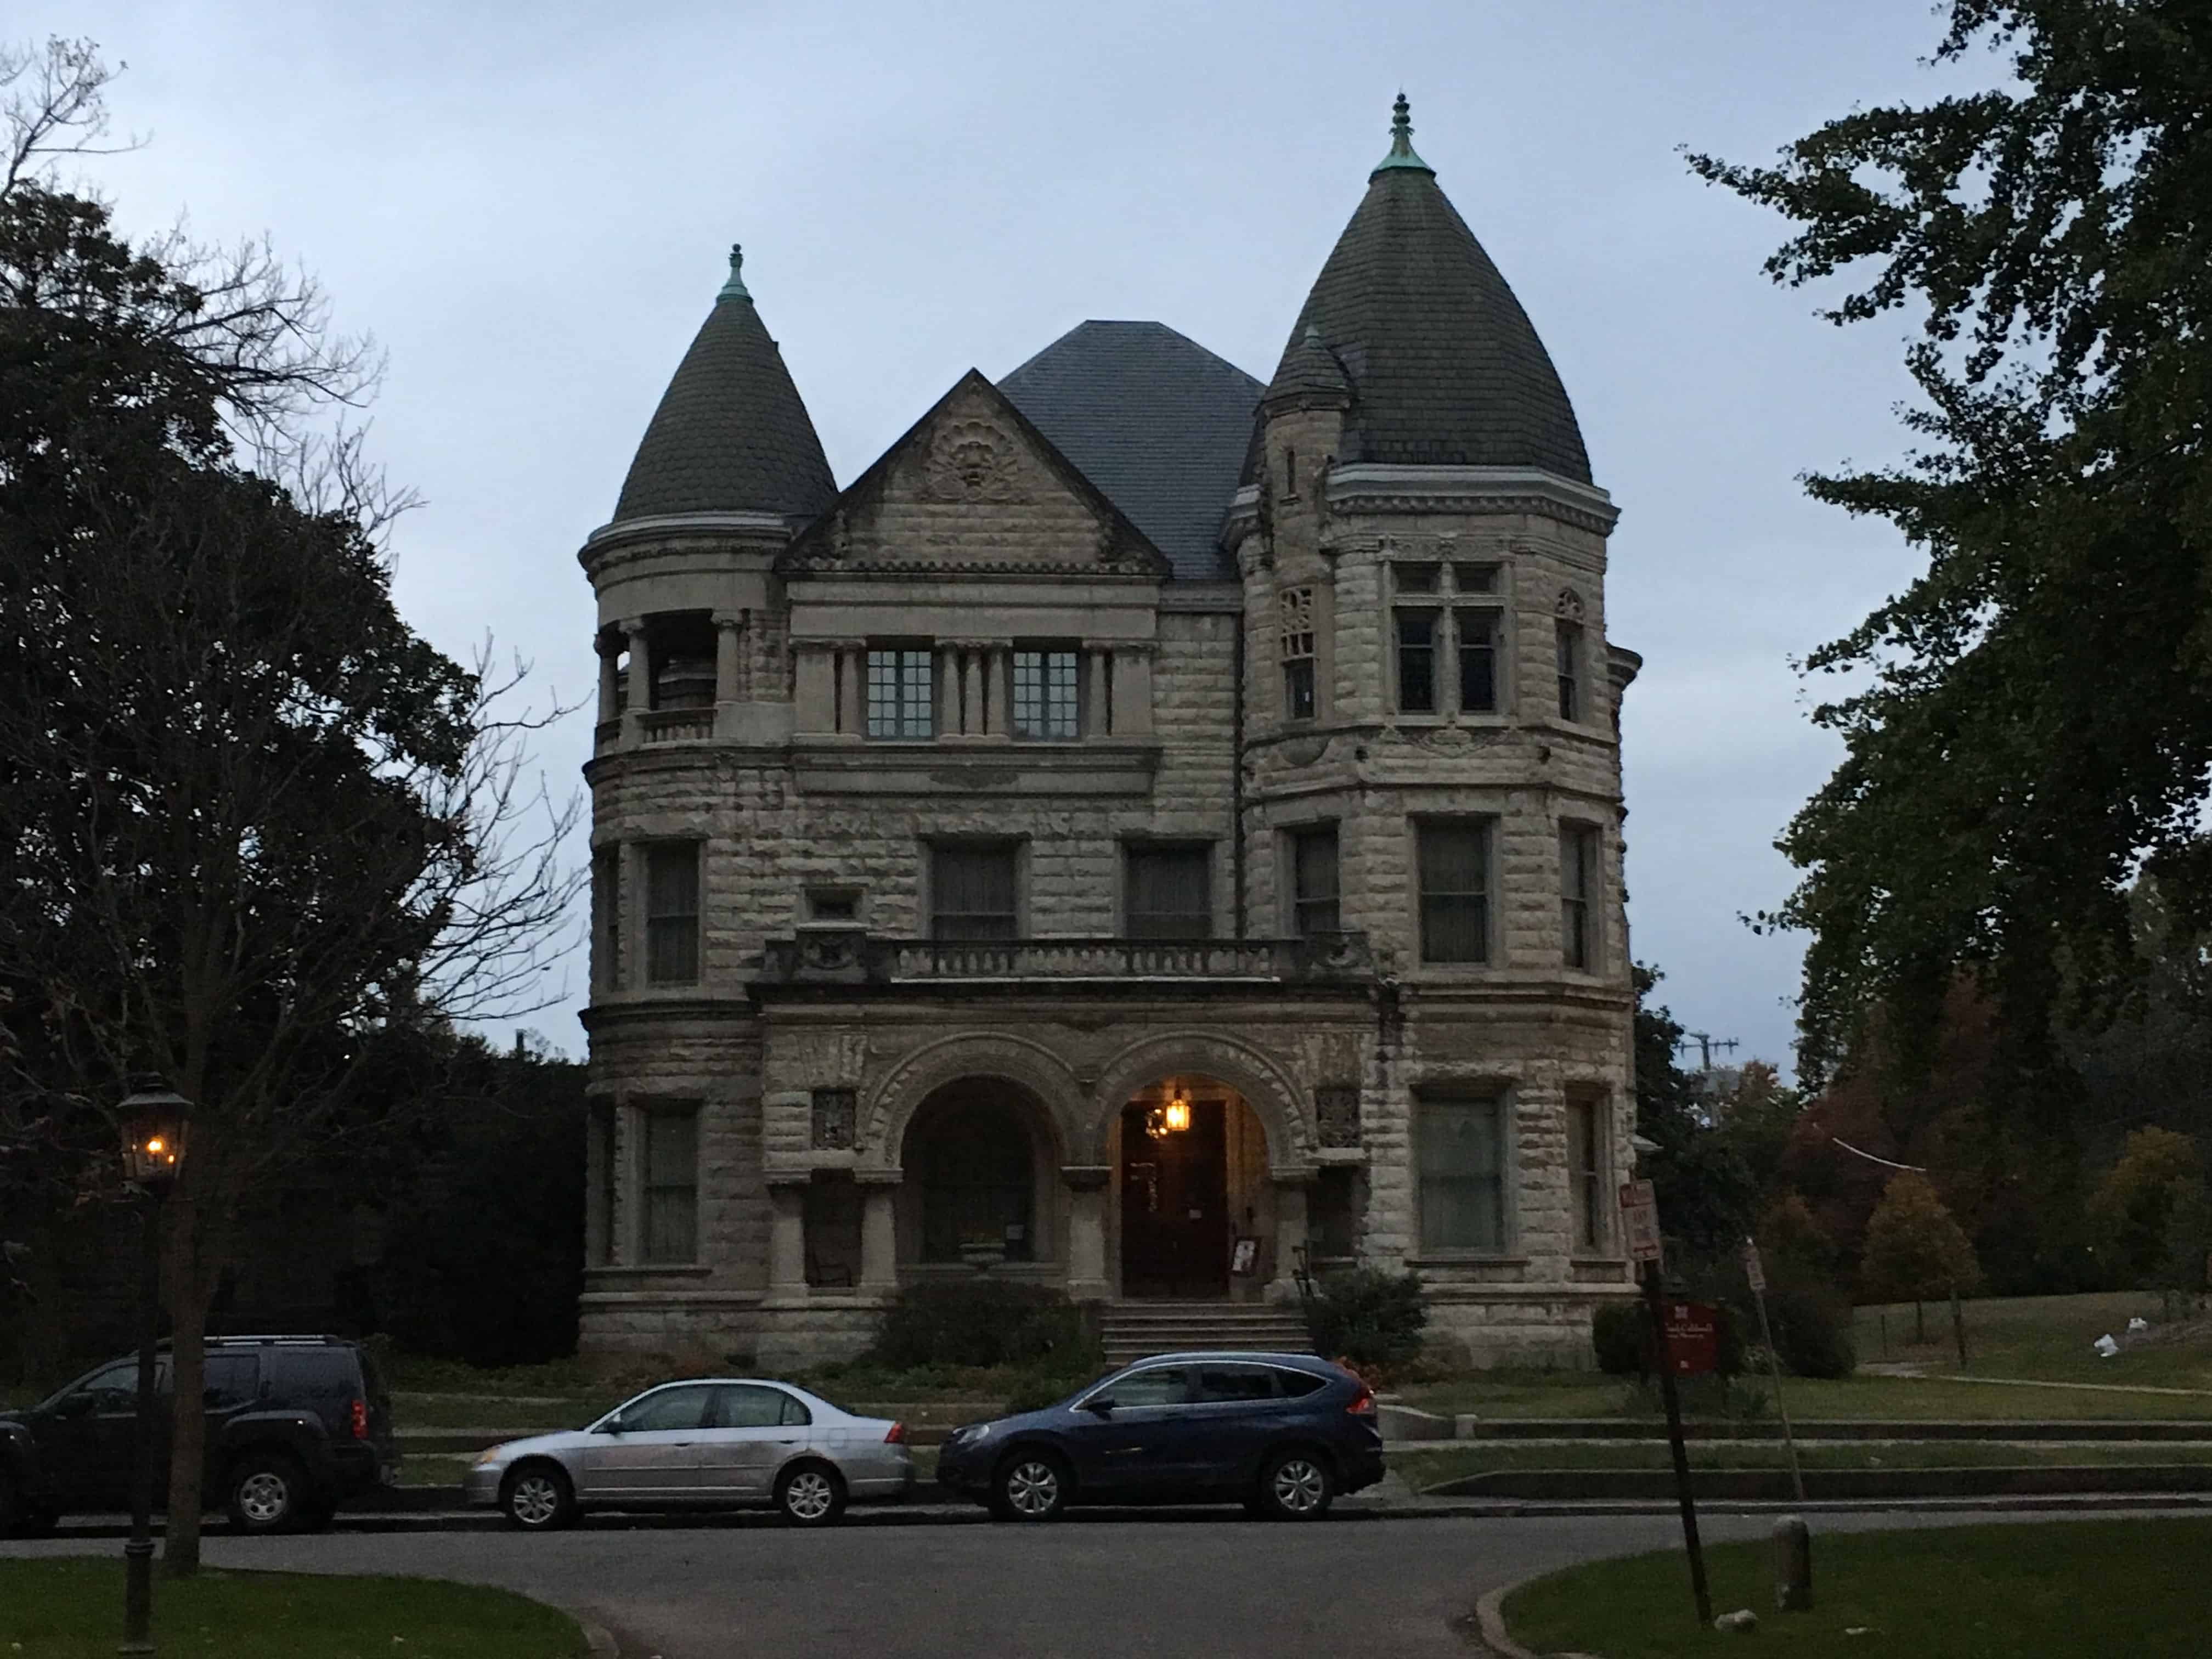 Conrad-Caldwell House on St. James Court in Louisville, Kentucky